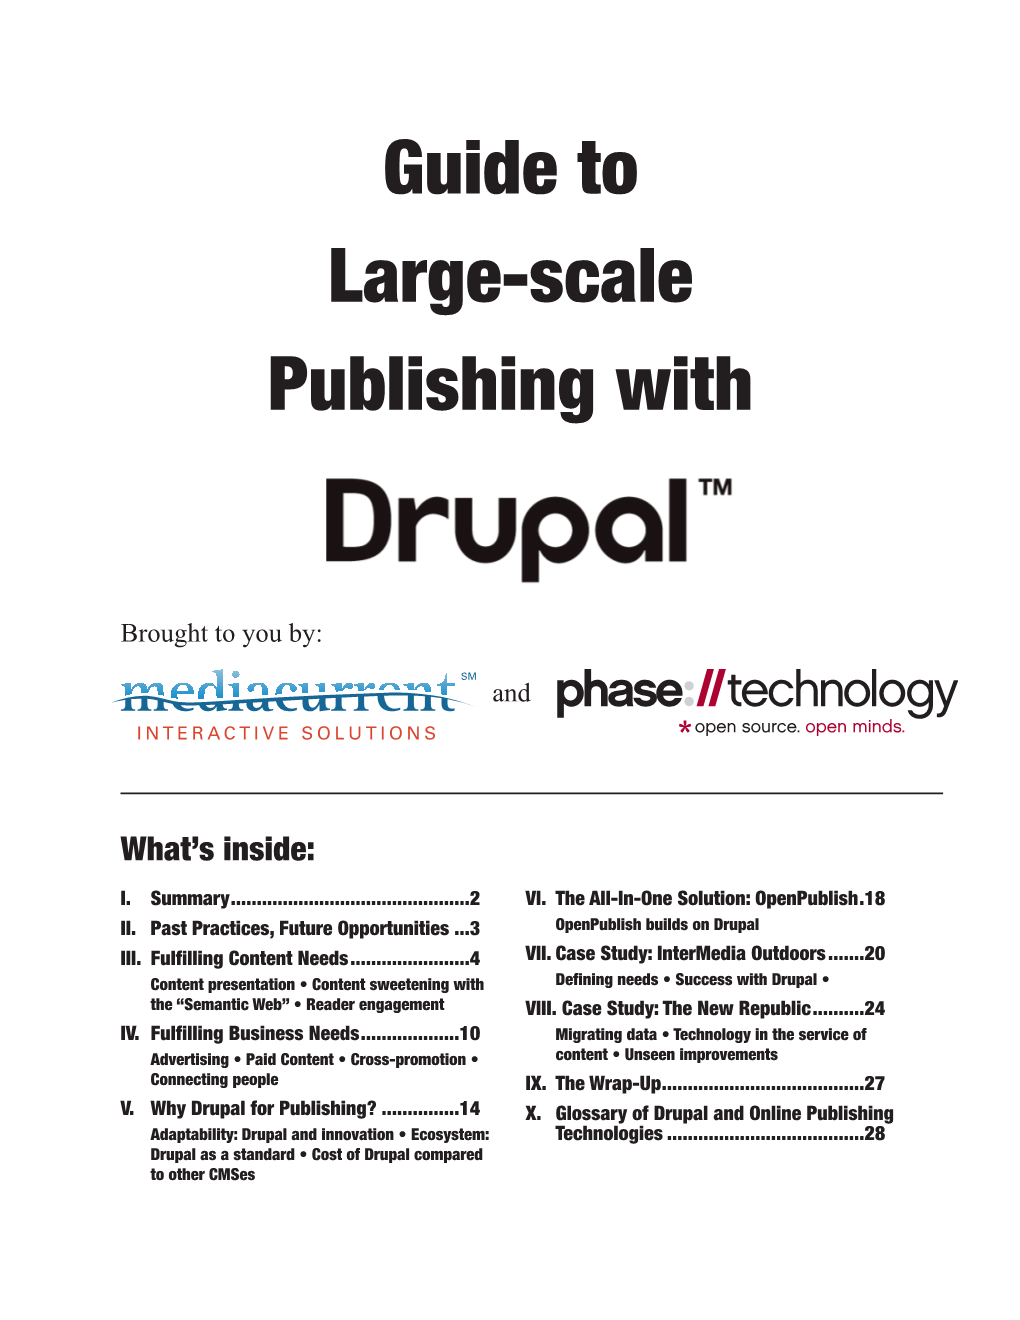 Guide to Large-Scale Publishing with Drupal